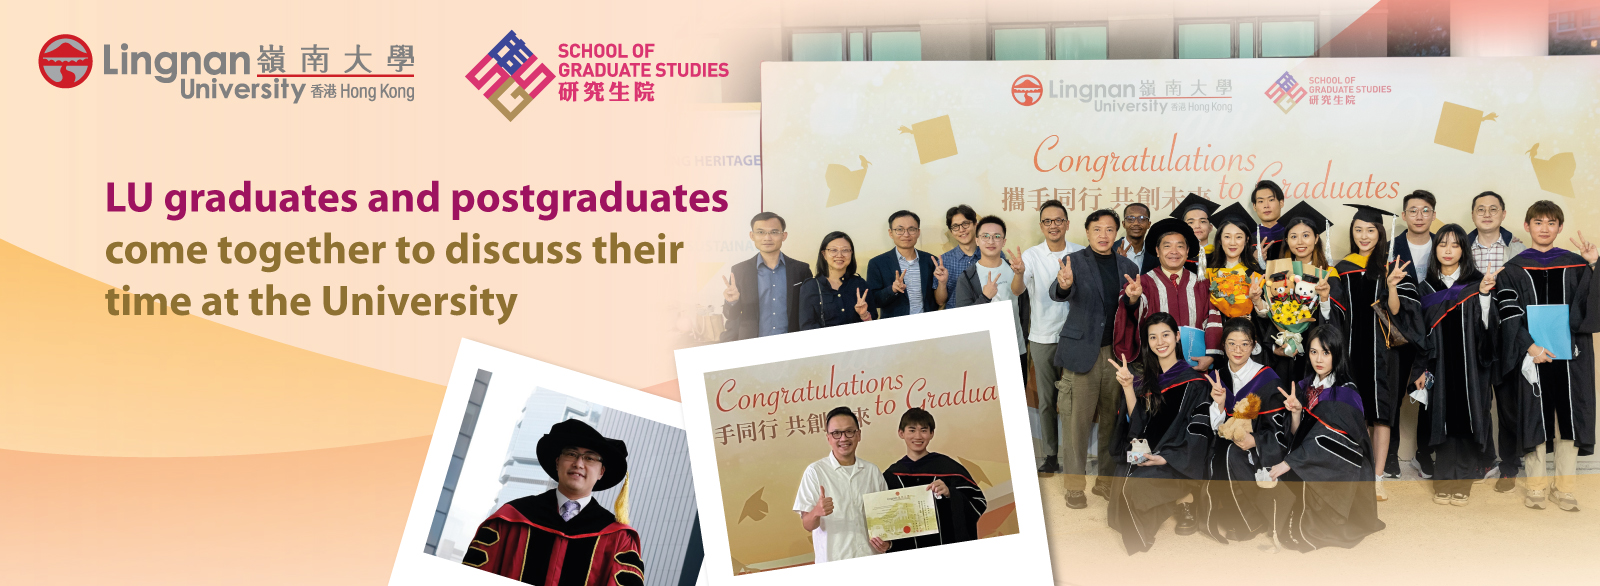 LU graduates and postgraduates come together to discuss their time at the University